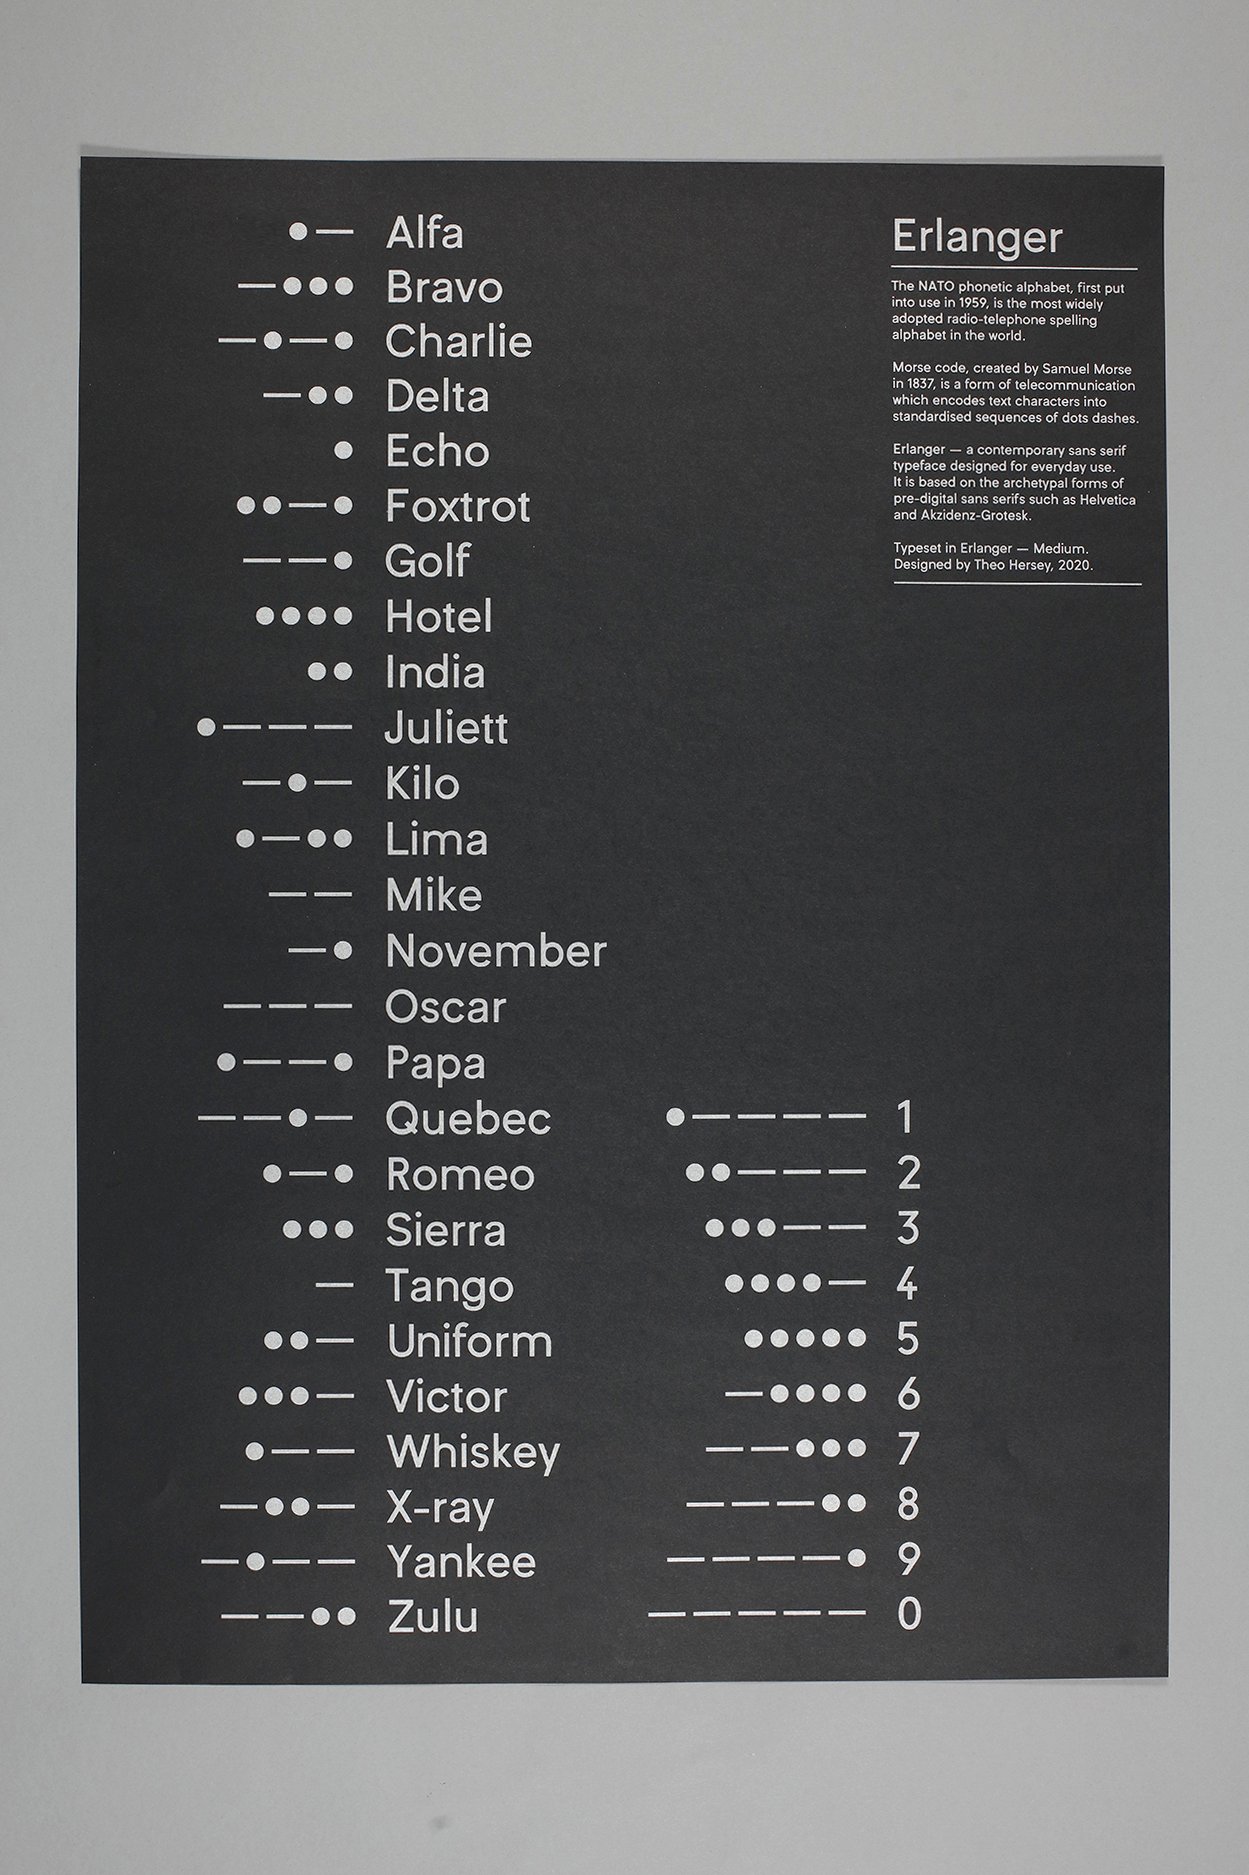 Specimen poster consisting of the NATO phonetic alphabet and corresponding morse code, printed in Pantone silver using offset-lithography. Printed on GF Smith Colorplan Ebony 135gsm.